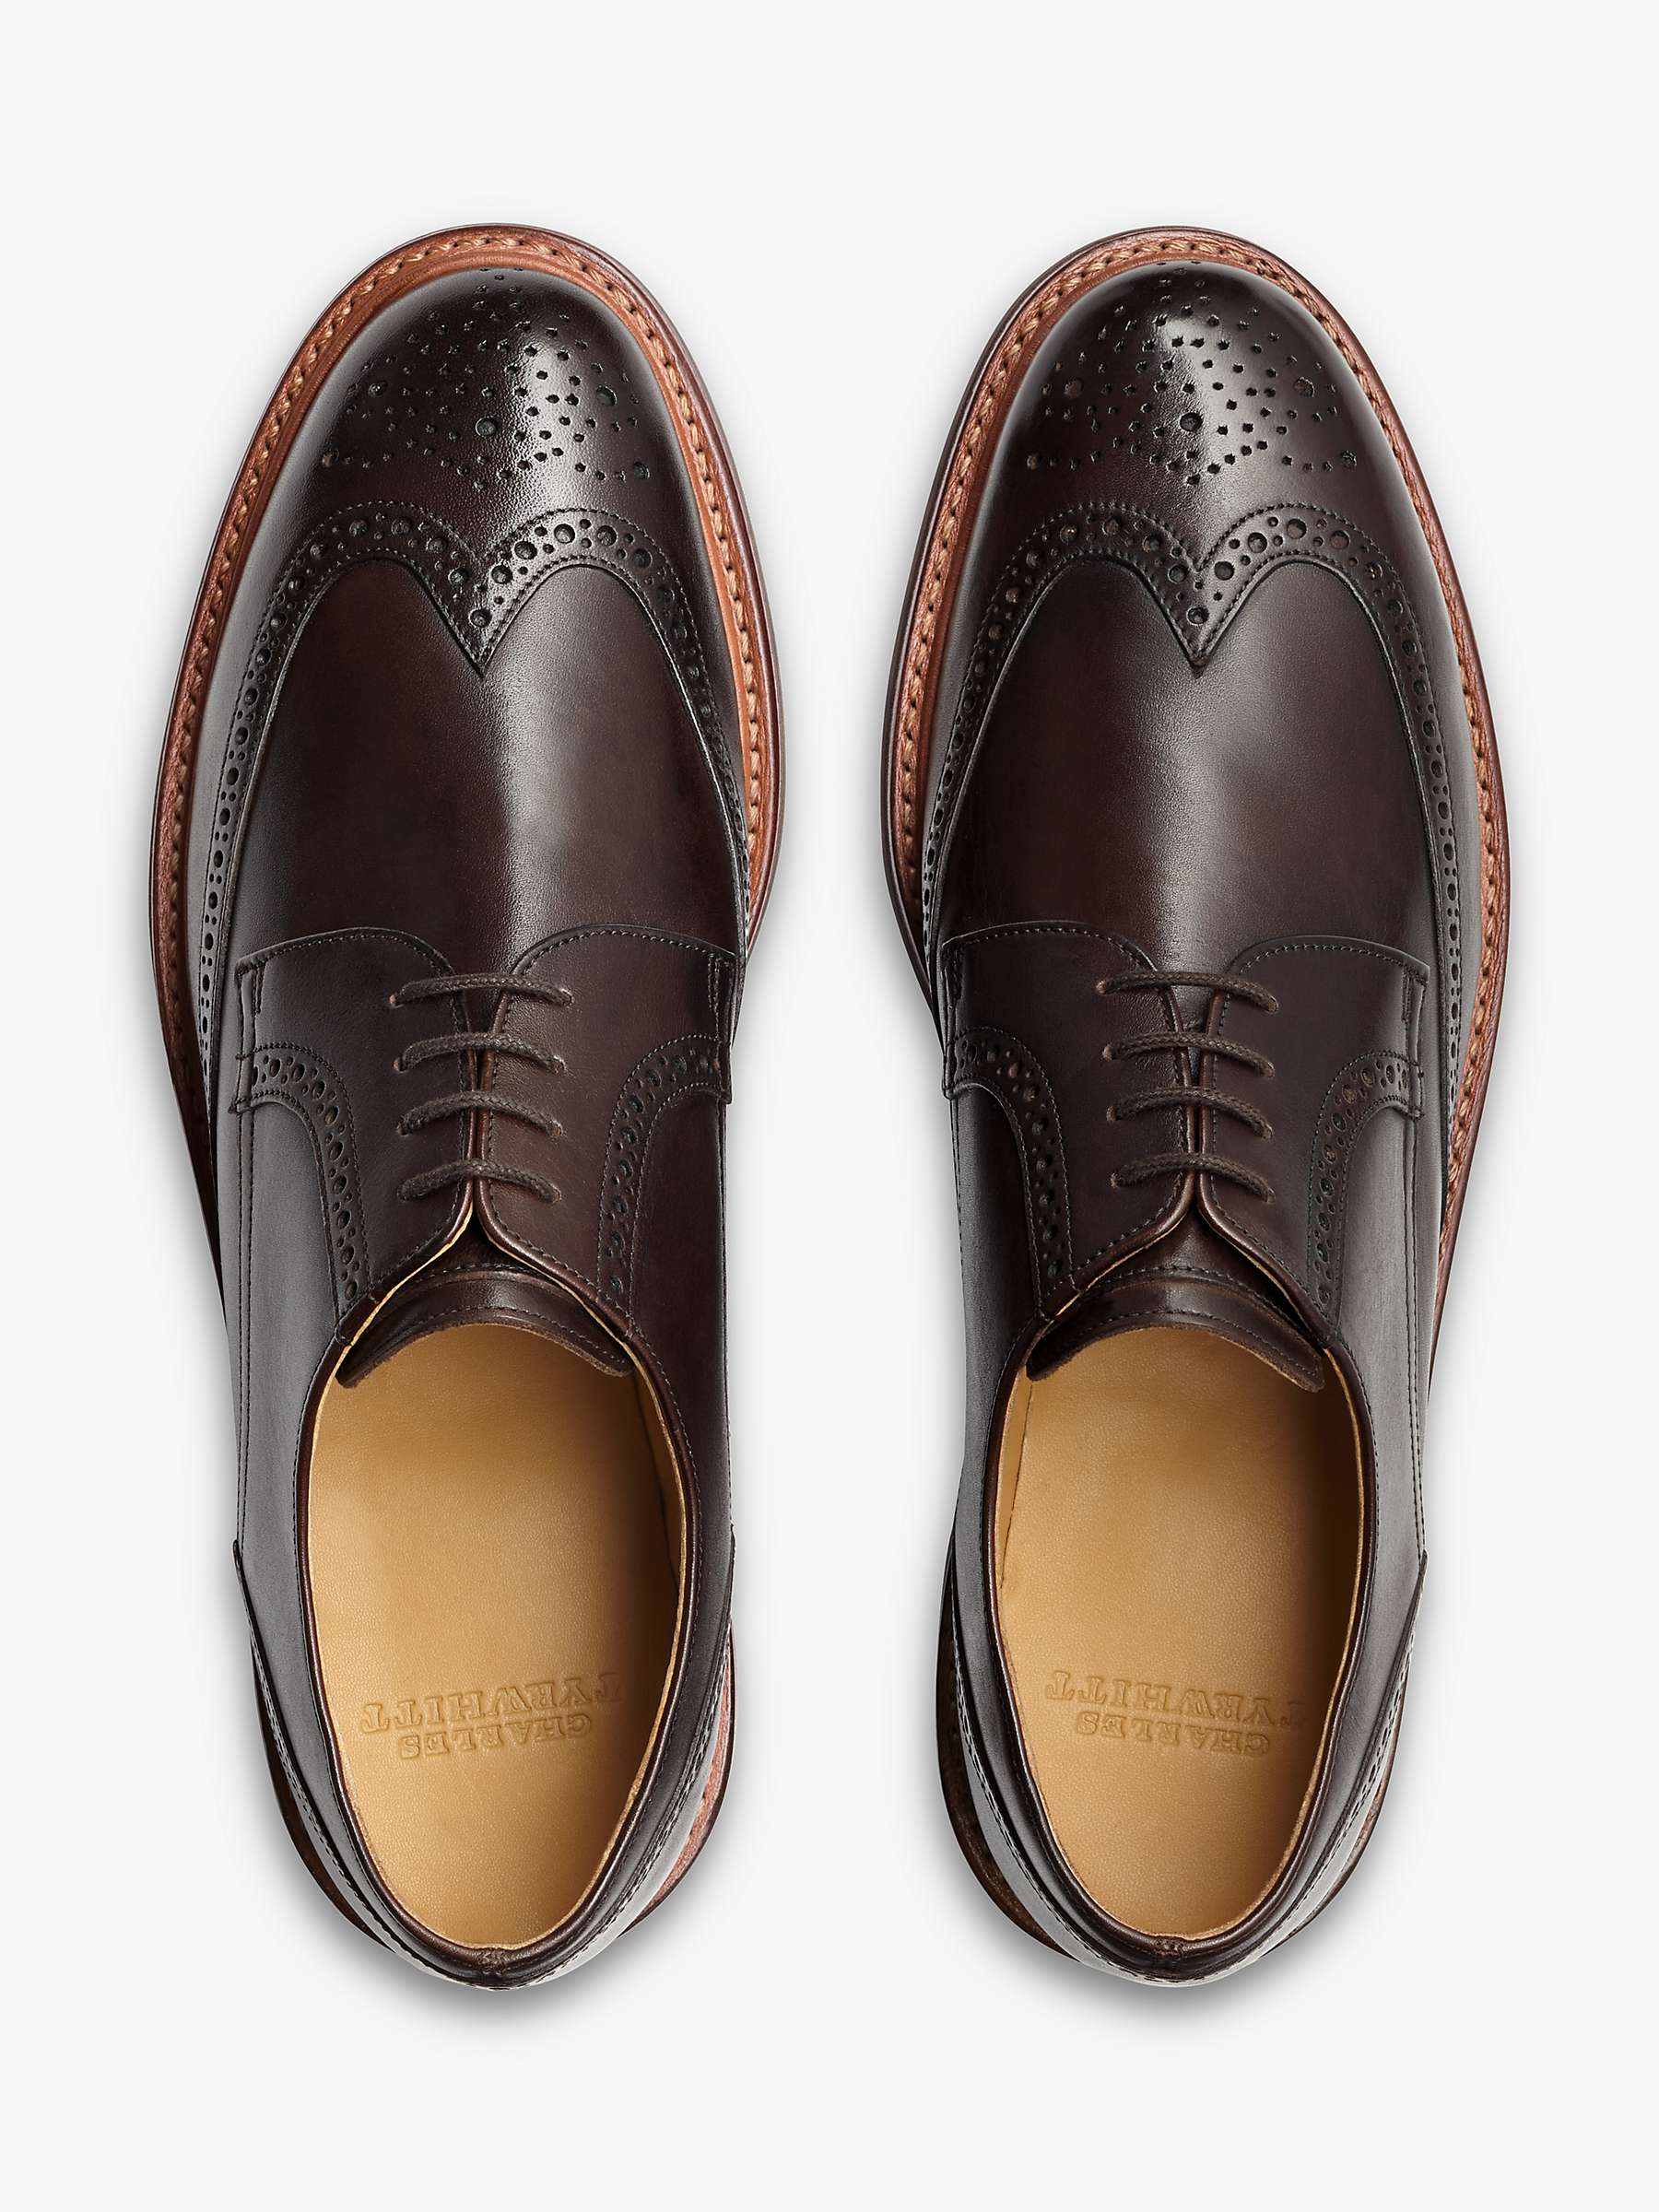 Buy Charles Tyrwhitt Lace Up Leather Derby Brogues, Dark Chocolate Online at johnlewis.com